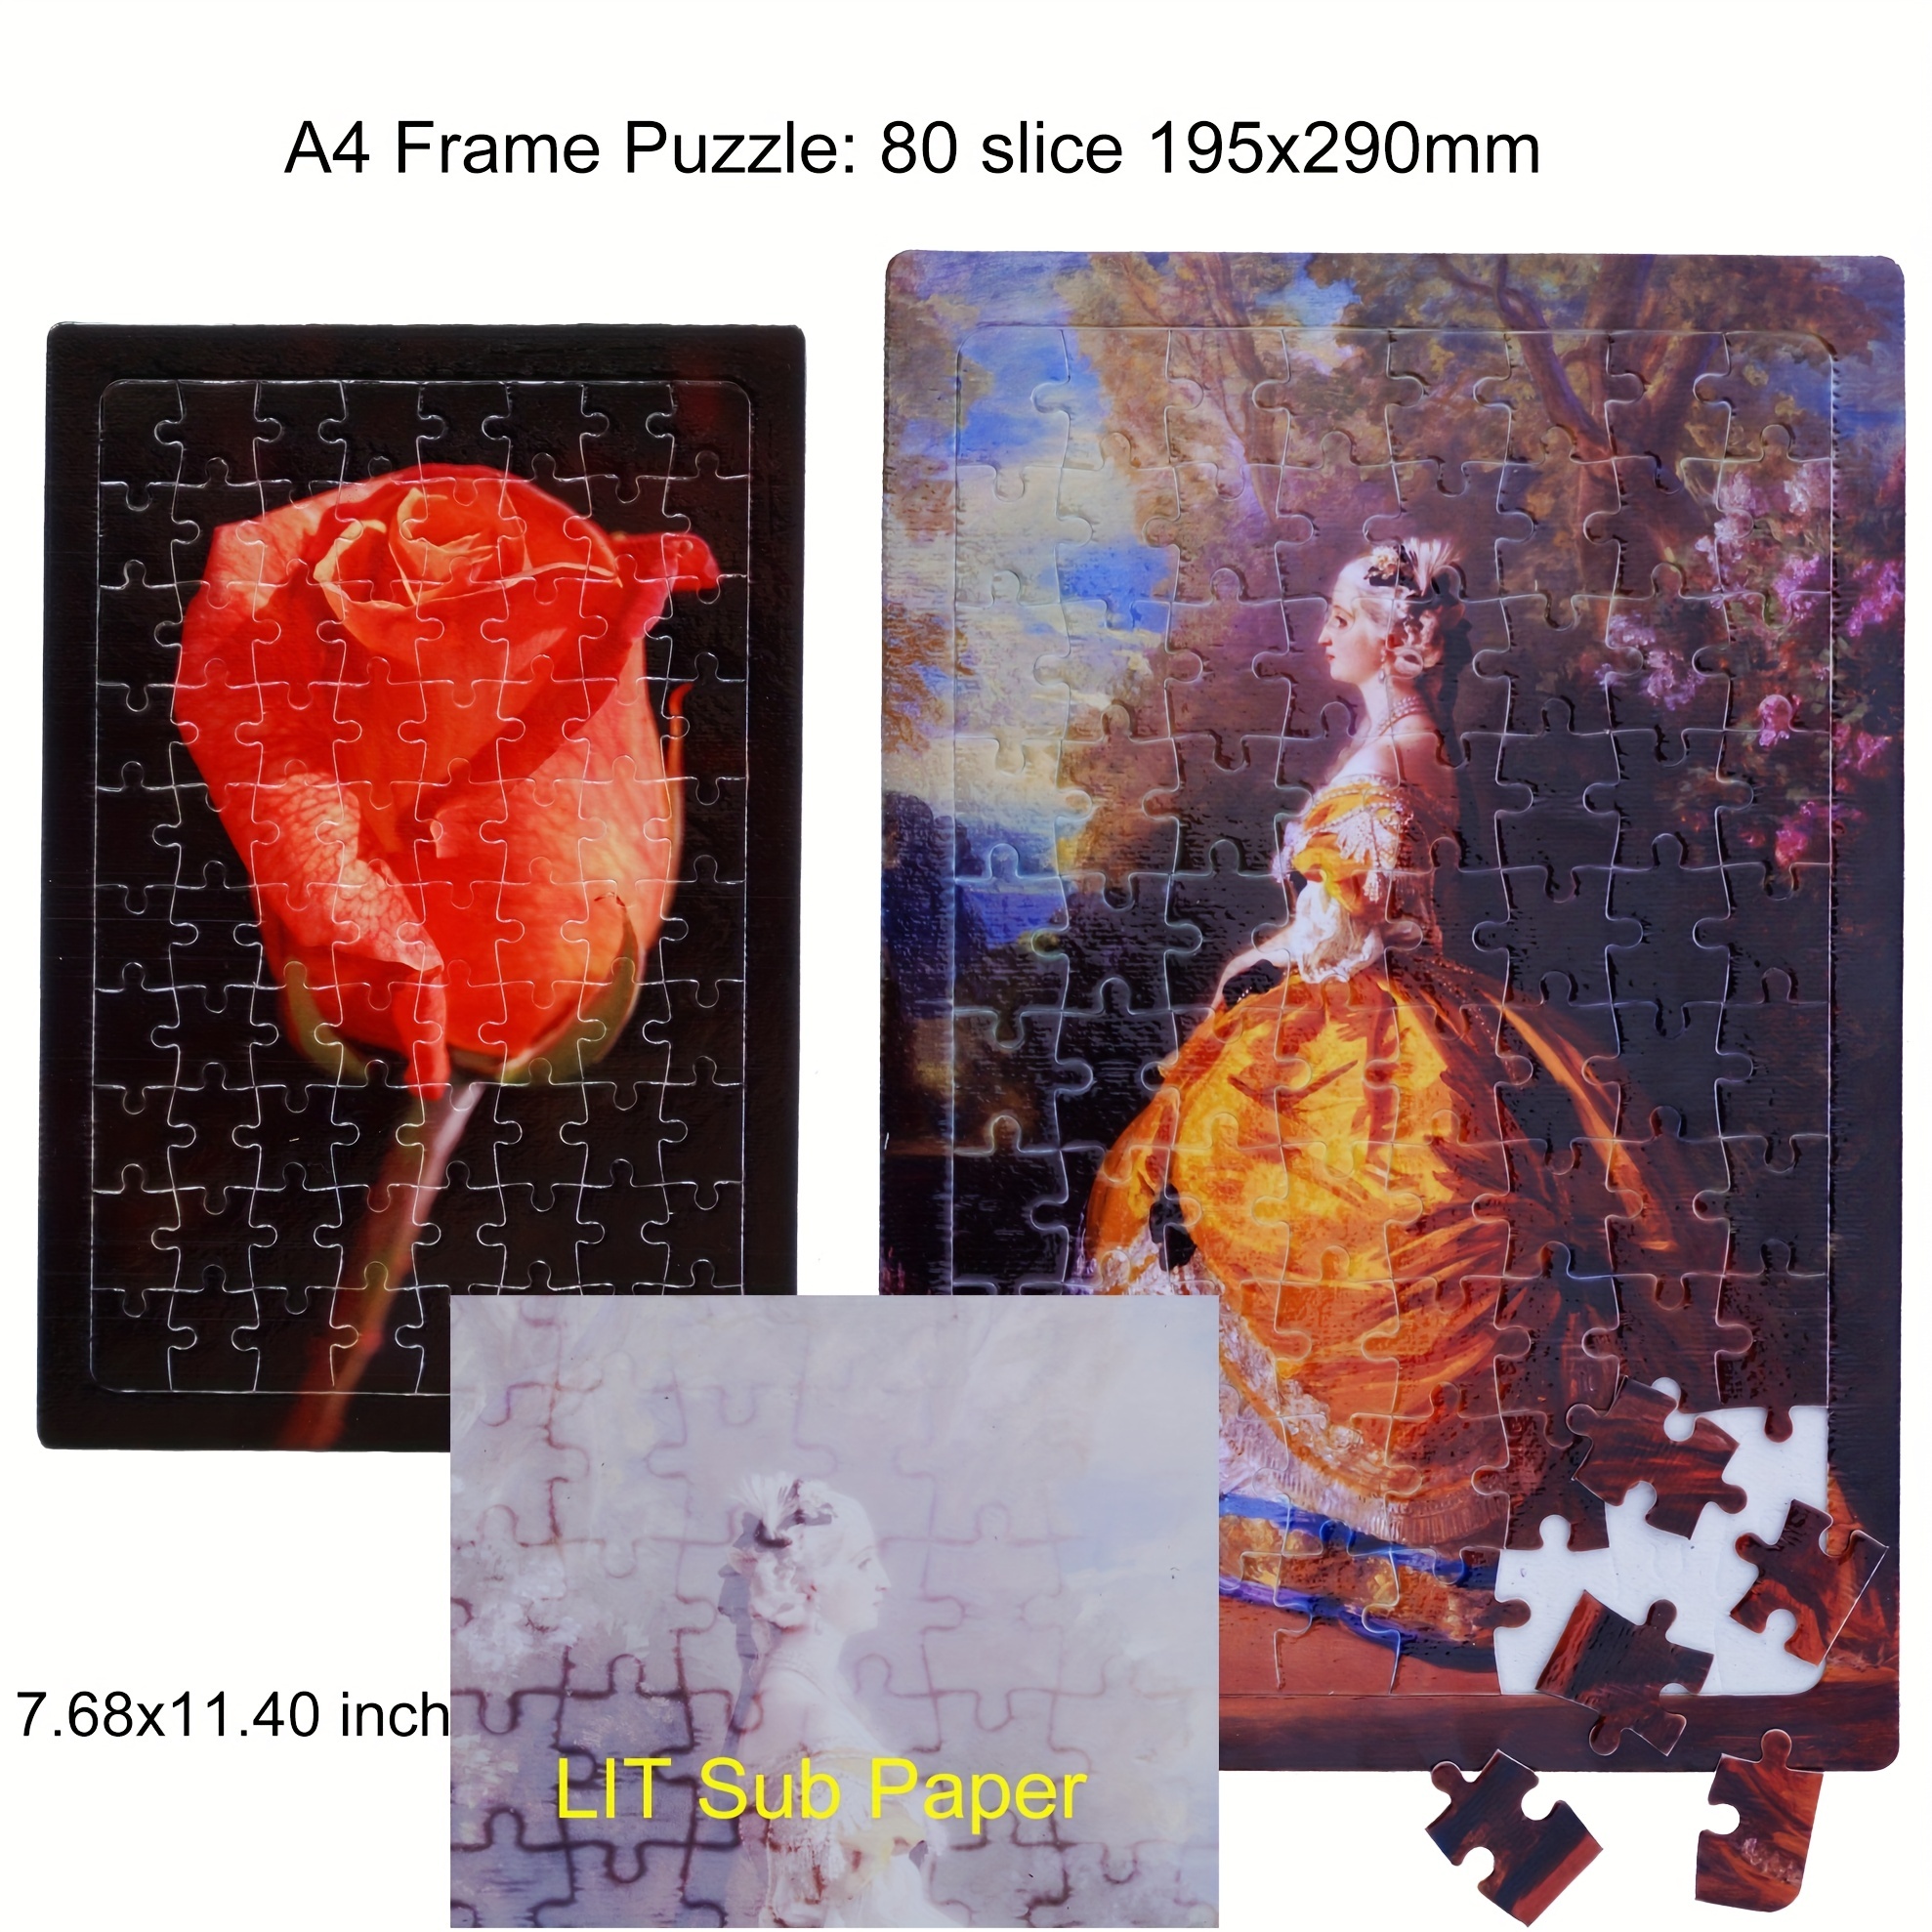 Lit Paper 5 Sets 2-in-1 Photo Frame Sublimation Jigsaw Puzzle Blanks Combo 2 Shape Bone Medal - DIY Heat Press Transfer Crafts 63 Slices Thermal